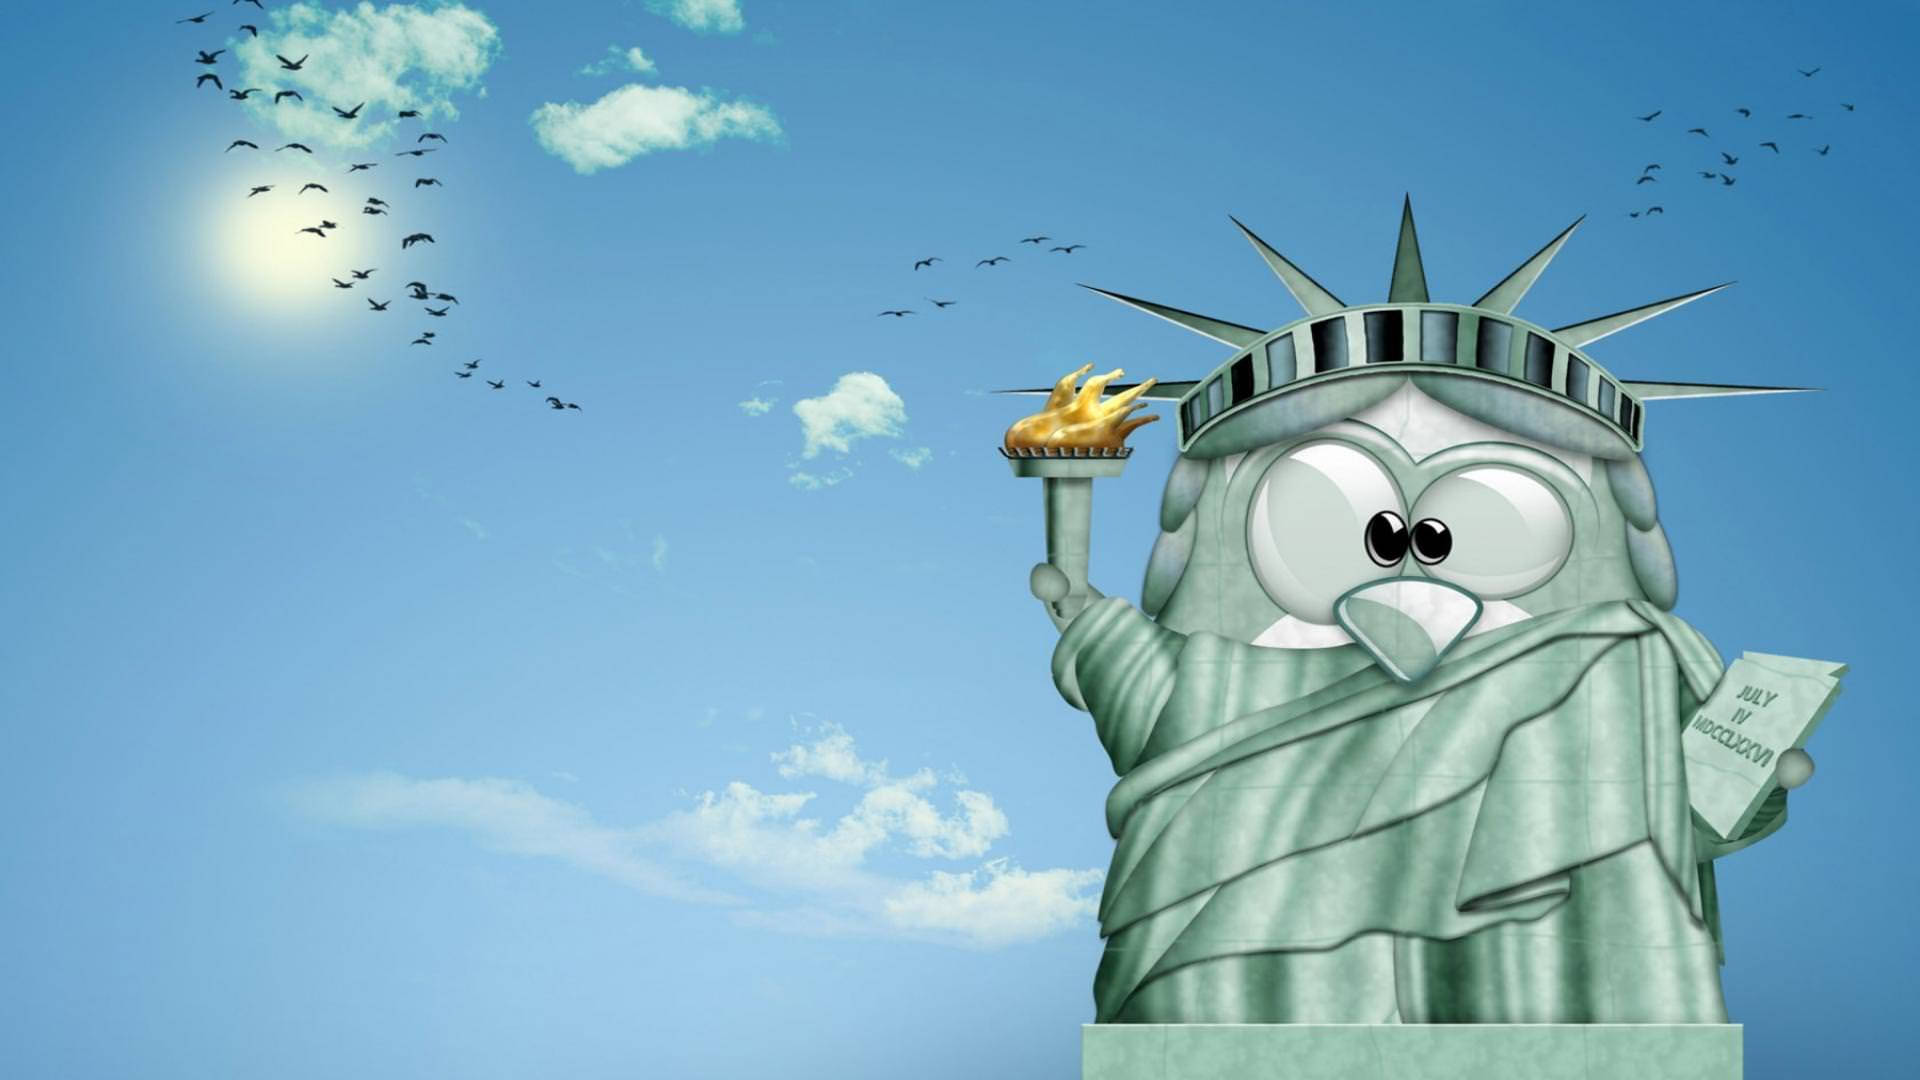 Hd Funny Statue Of Liberty Background